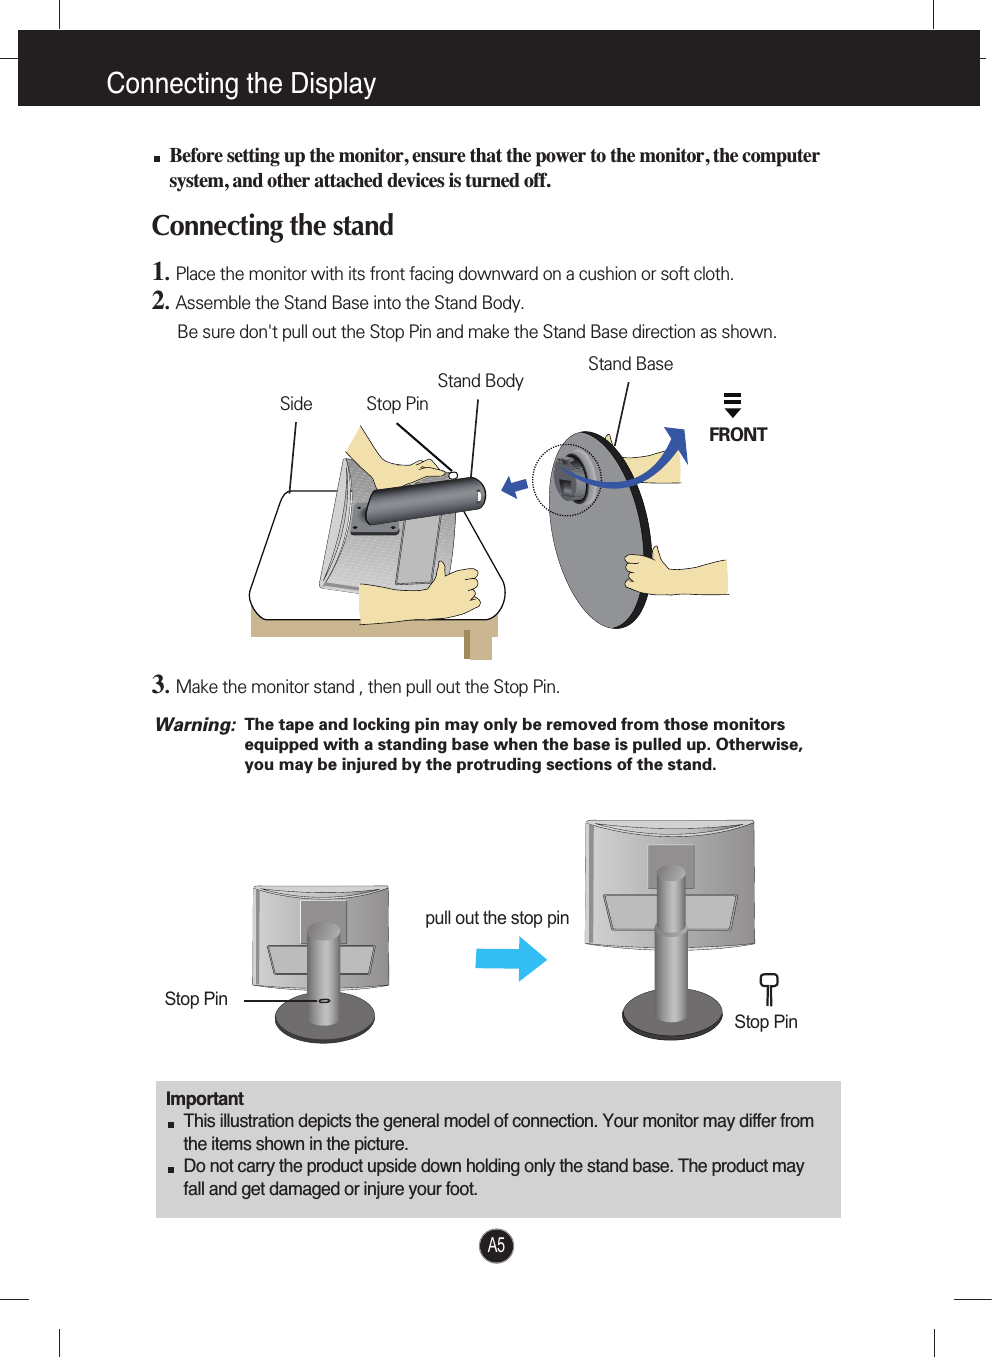 A5Connecting the DisplayImportantThis illustration depicts the general model of connection. Your monitor may differ fromthe items shown in the picture.Do not carry the product upside down holding only the stand base. The product mayfall and get damaged or injure your foot.Before setting up the monitor, ensure that the power to the monitor, the computersystem, and other attached devices is turned off.Connecting the stand 1.  Place the monitor with its front facing downward on a cushion or soft cloth.2.Assemble the Stand Base into the Stand Body.Be sure don&apos;t pull out the Stop Pin and make the Stand Base direction as shown. 3.Make the monitor stand , then pull out the Stop Pin.pull out the stop pinStop PinStop PinStand BaseFRONTStand BodyStop PinSideThe tape and locking pin may only be removed from those monitorsequipped with a standing base when the base is pulled up. Otherwise,you may be injured by the protruding sections of the stand.Warning: